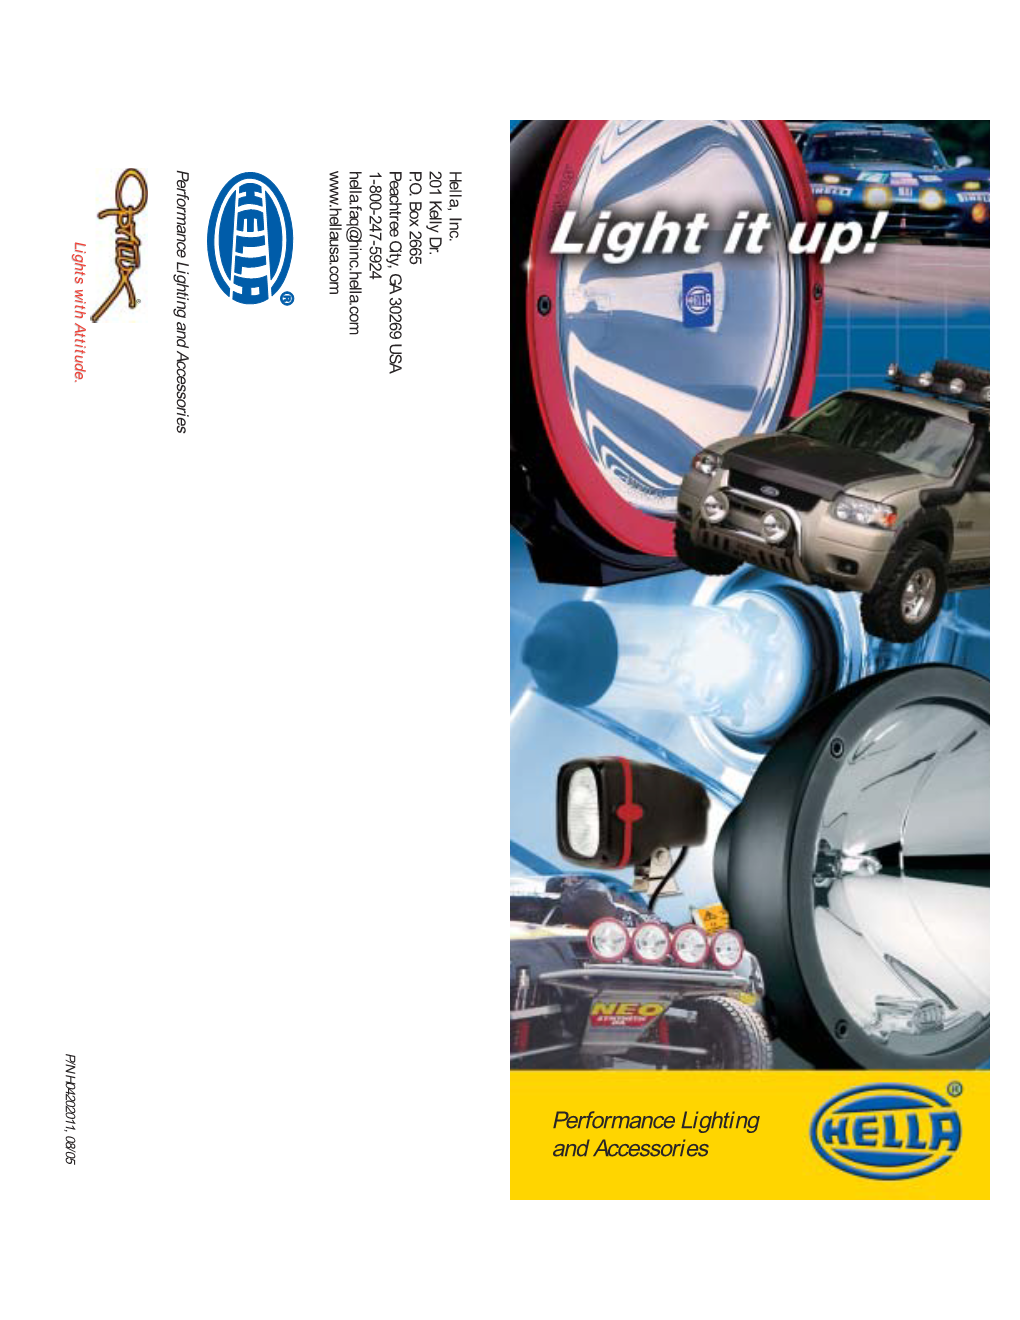 Performance Lighting and Accessories